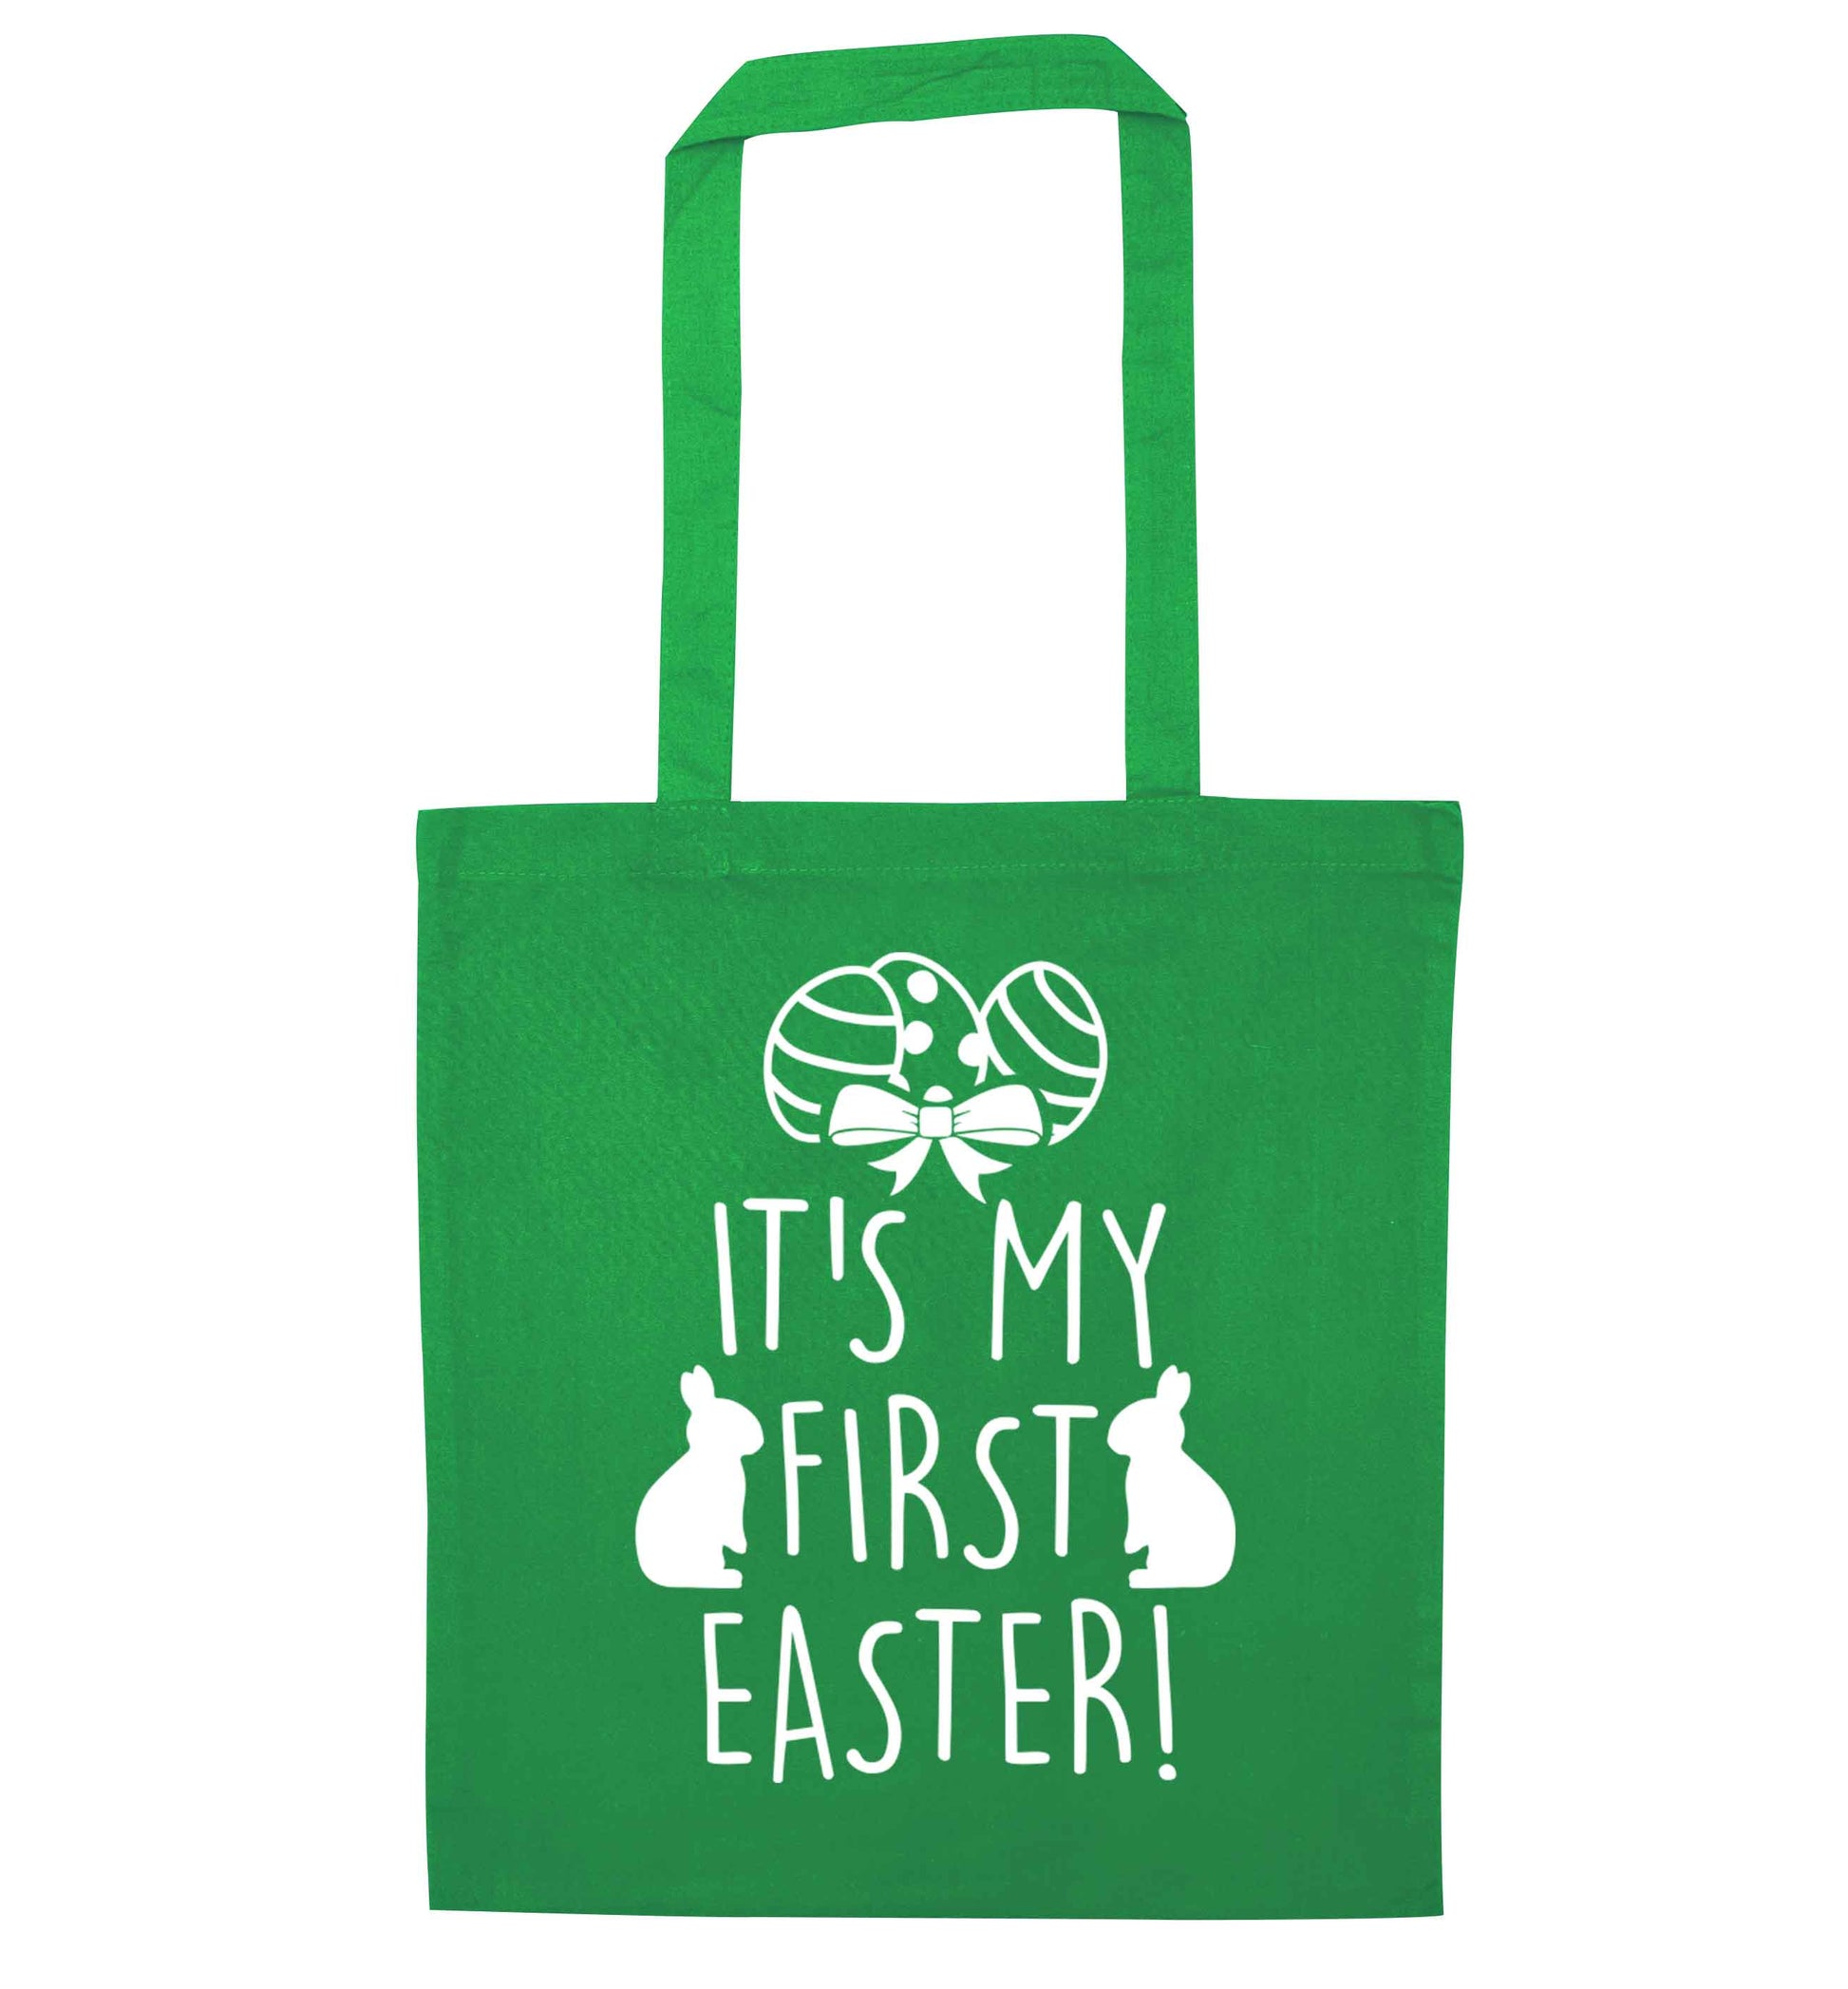 It's my first Easter green tote bag